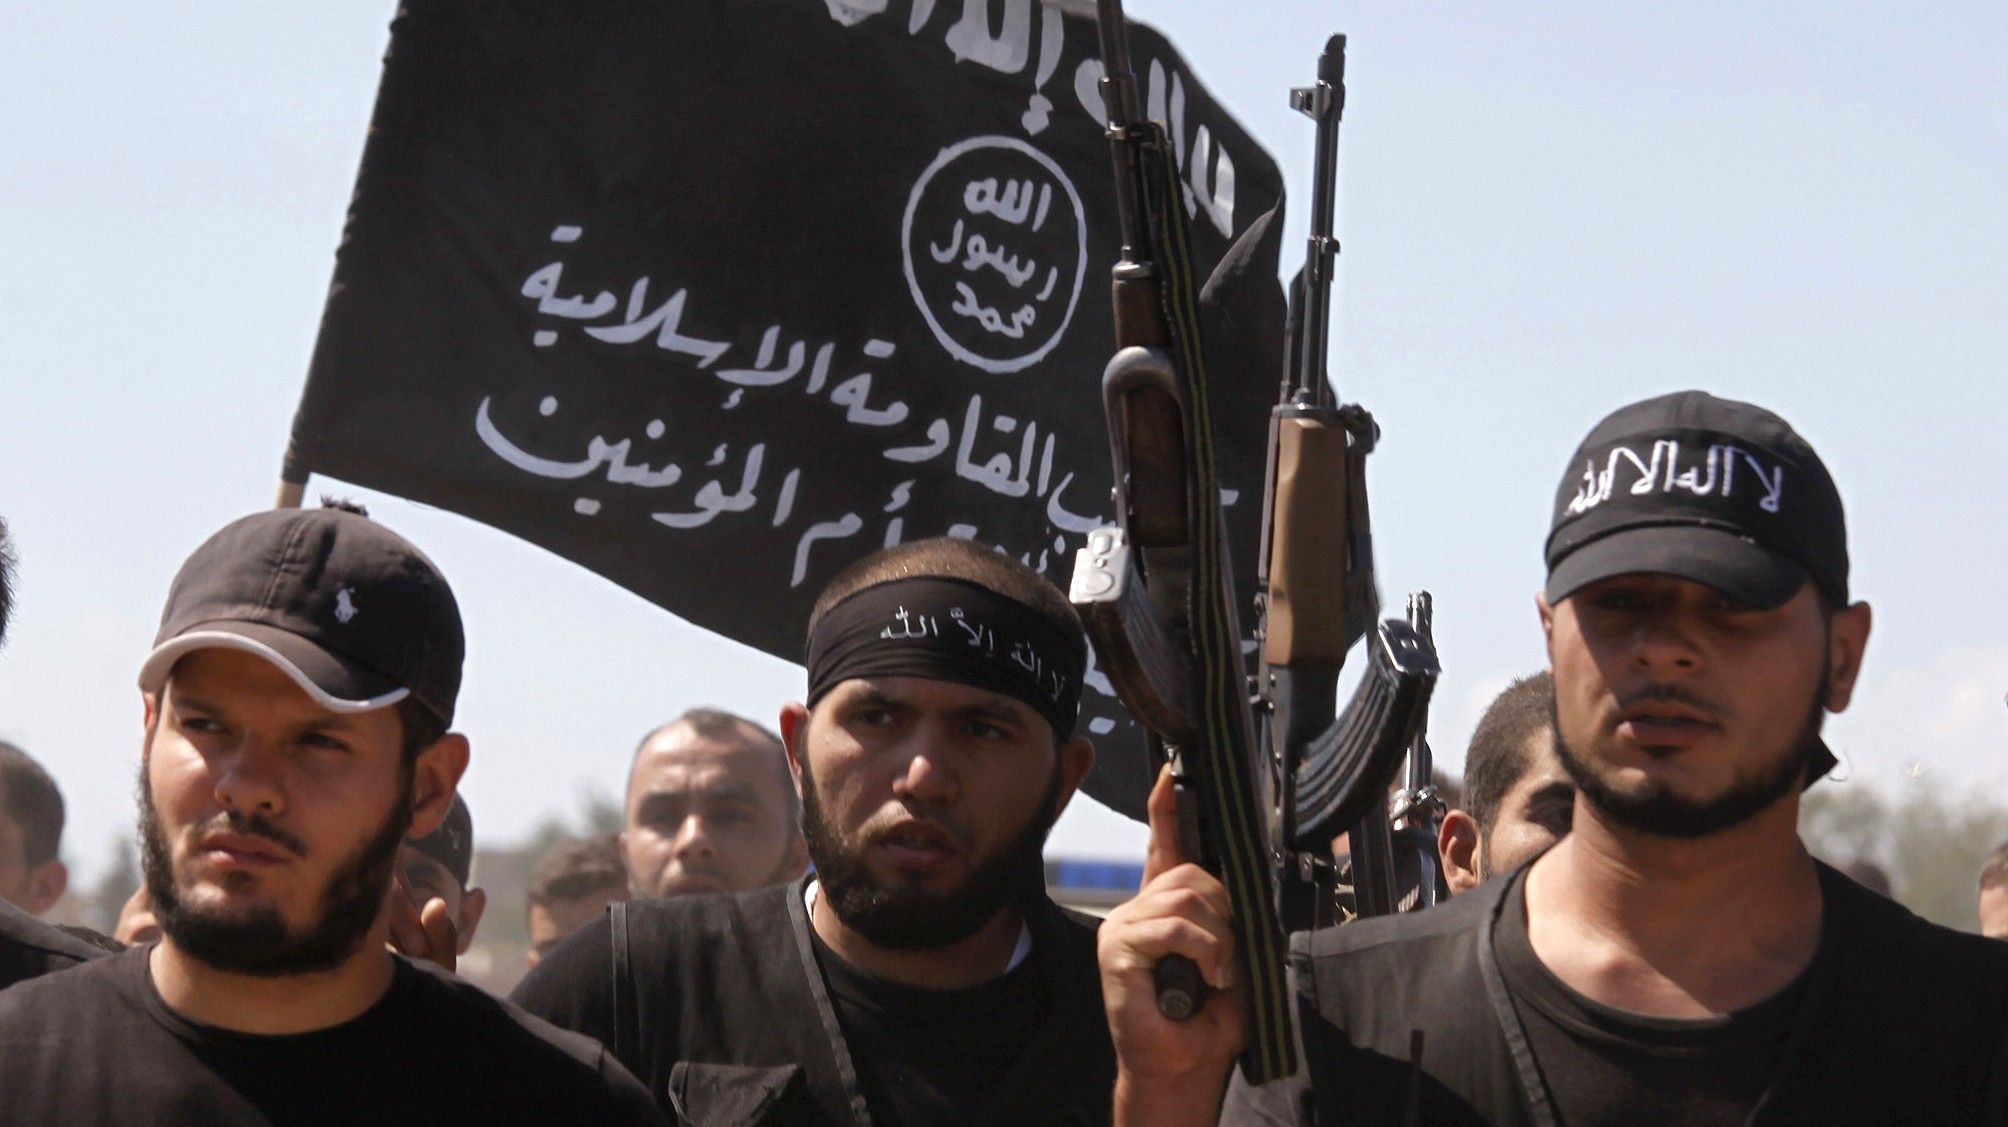 Officials: Islamic State arose from US support for al-Qaeda in Iraq